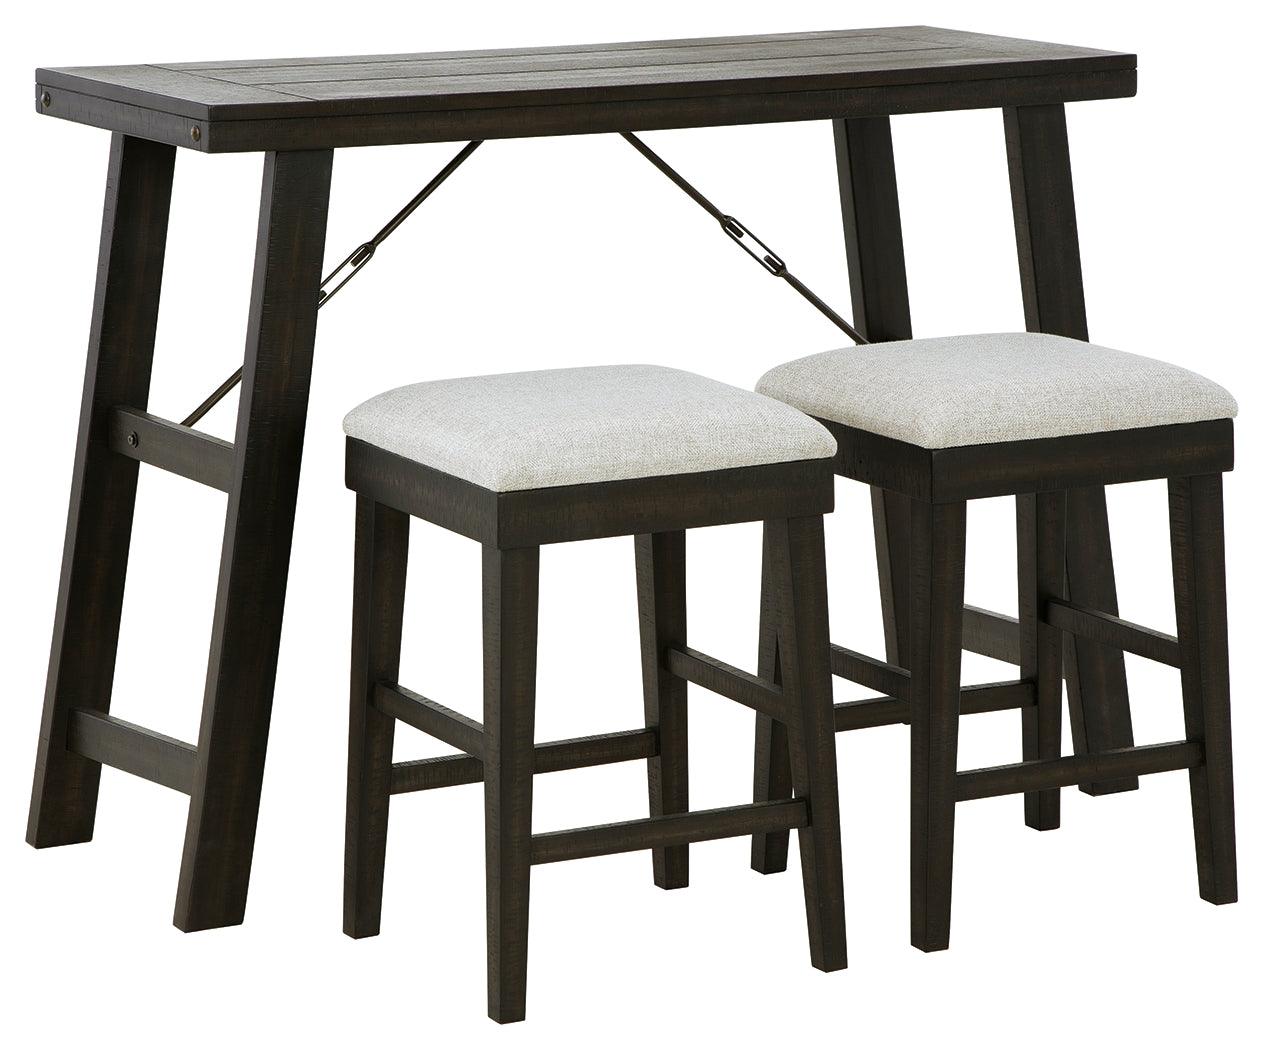 Noorbrook Antique Black Counter Height Dining Table And Bar Stools (Set Of 3) - Ella Furniture